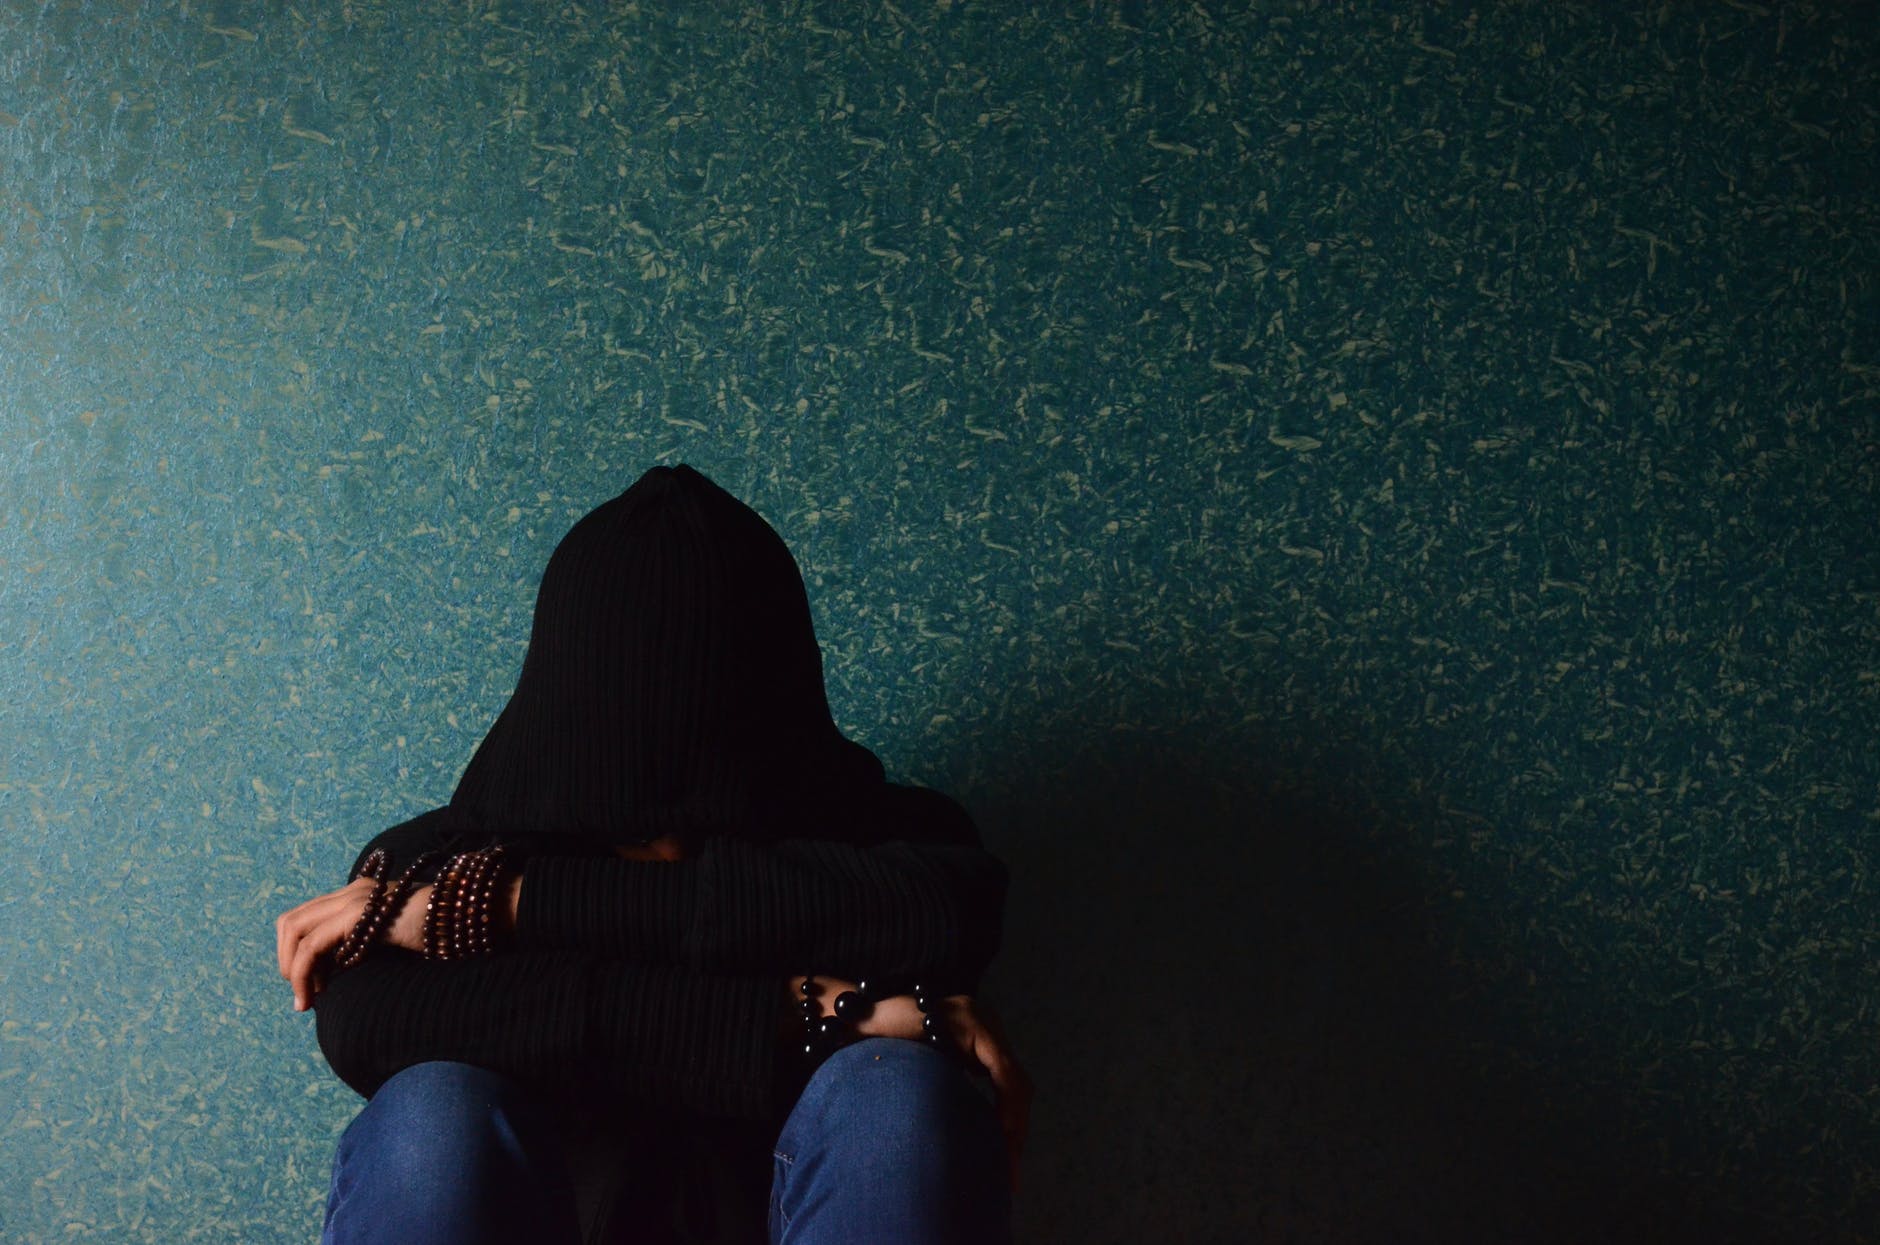 What to Do When a Friend is Depressed